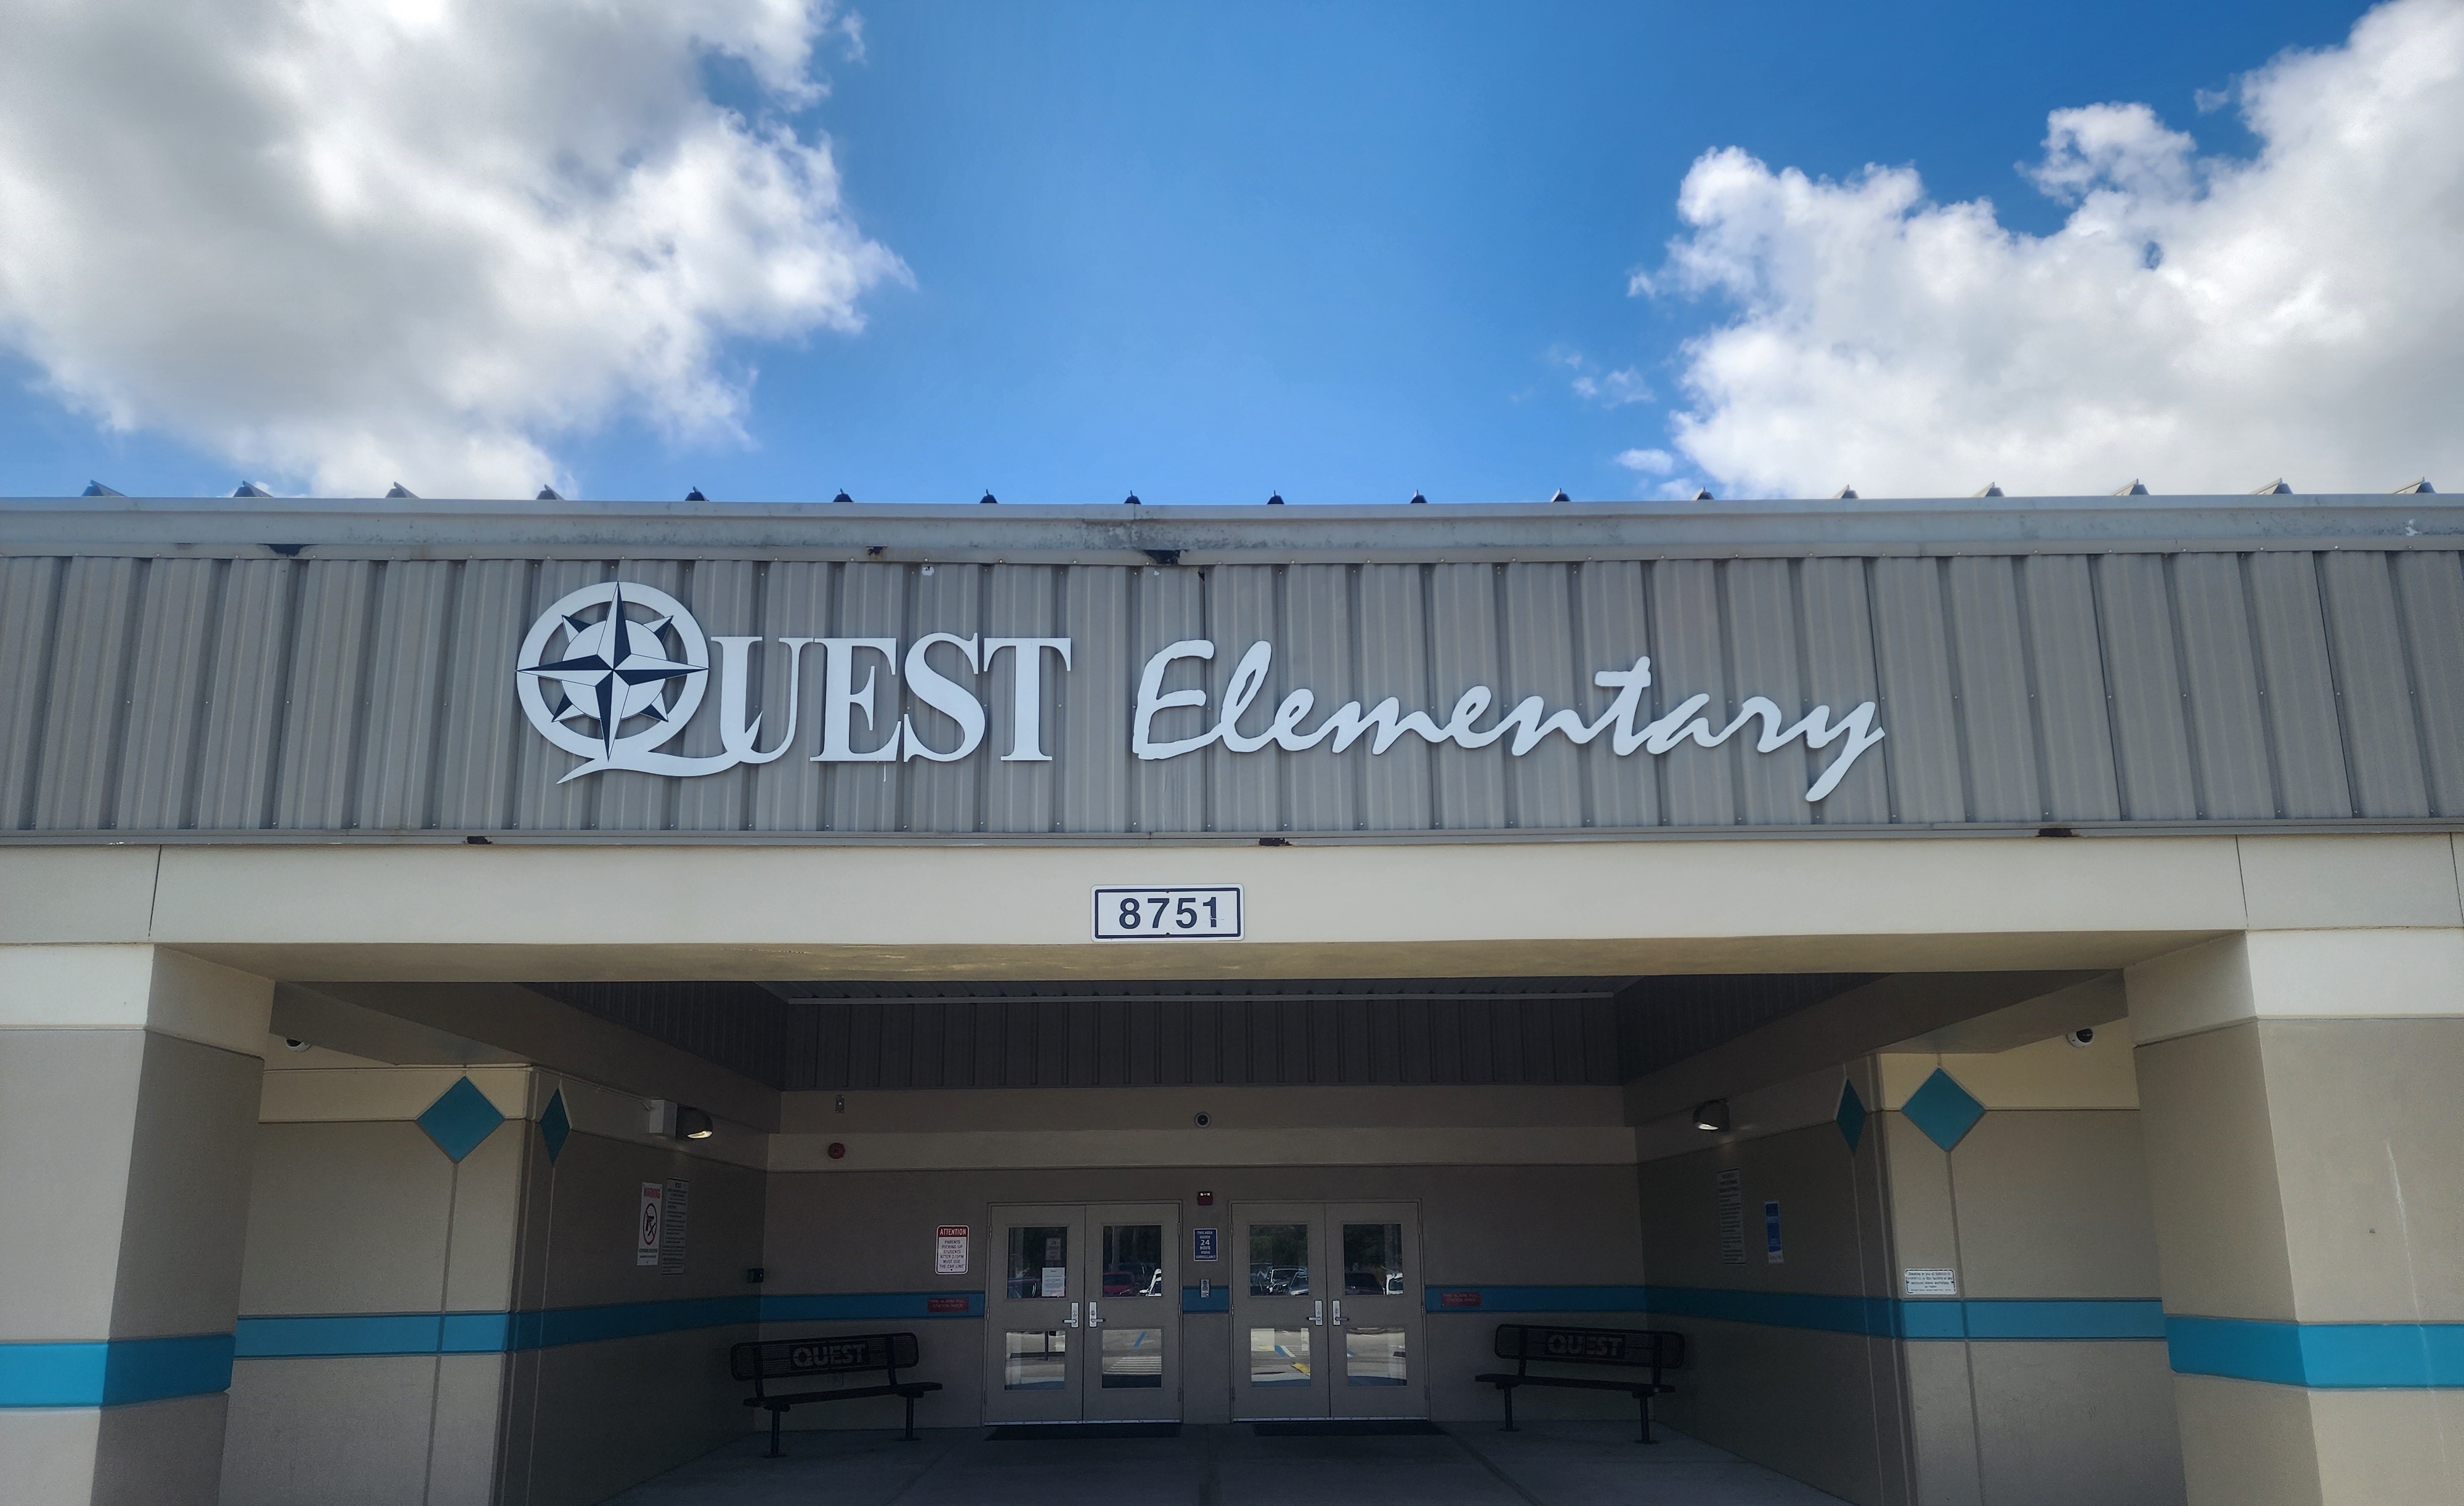 Quest Elementary